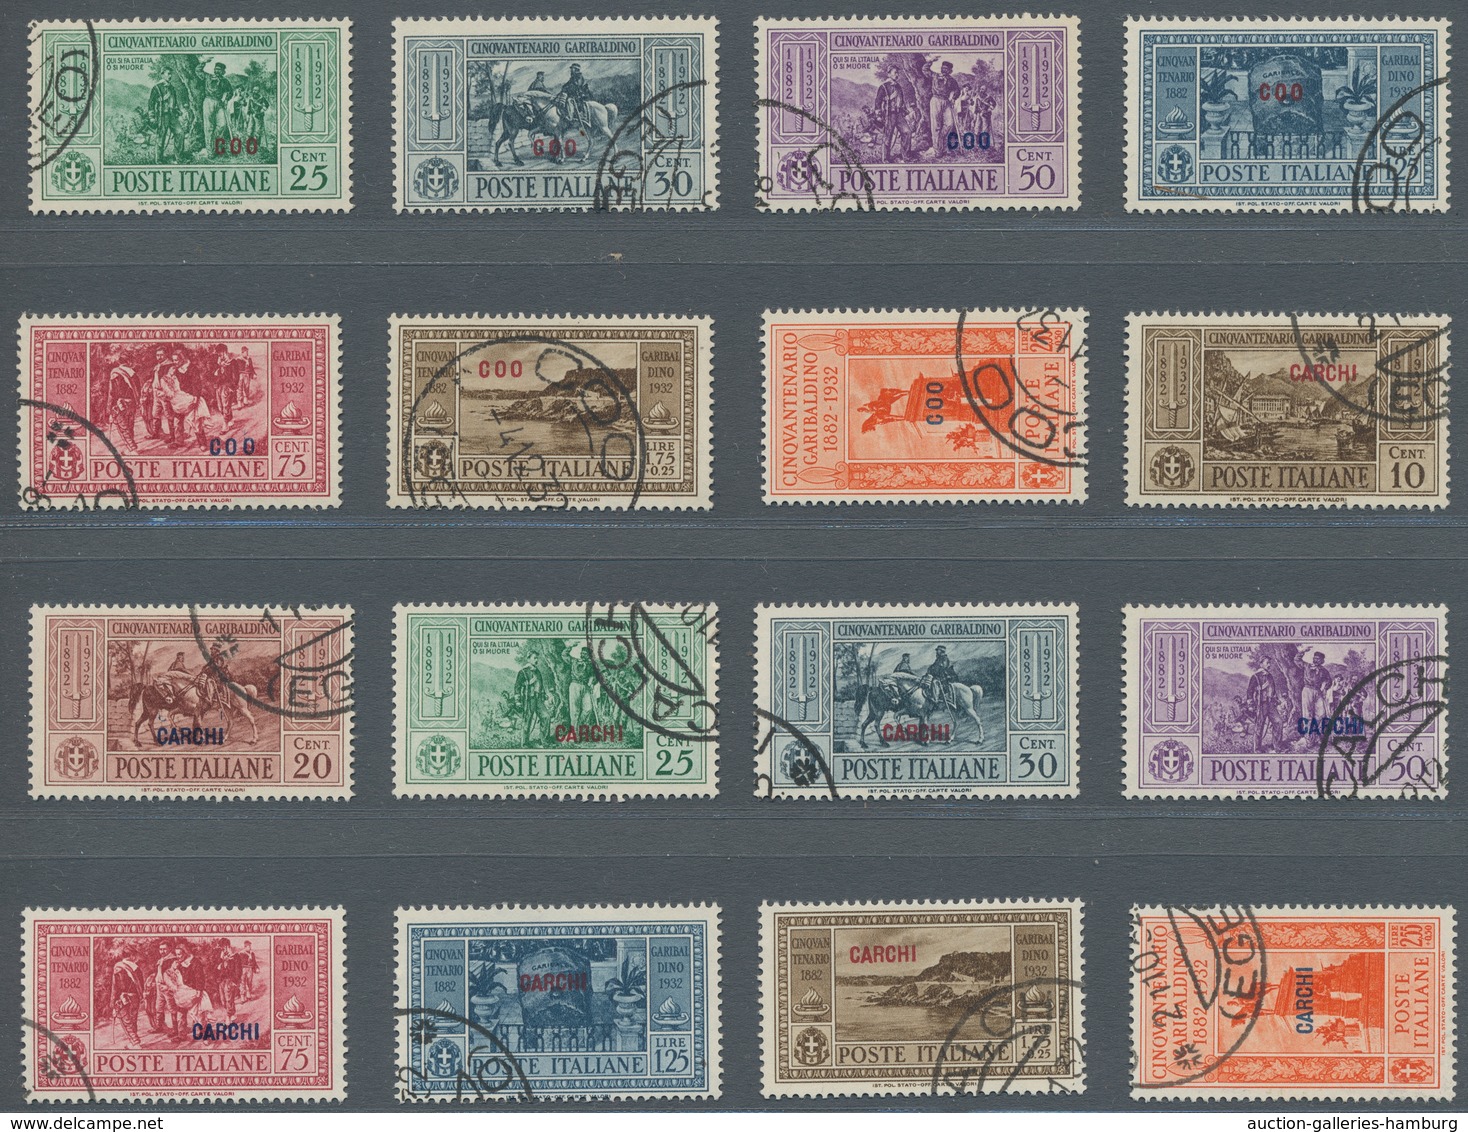 Ägäische Inseln: 1932, "Garibaldi with all island overprints", used sets in very fine condition. In